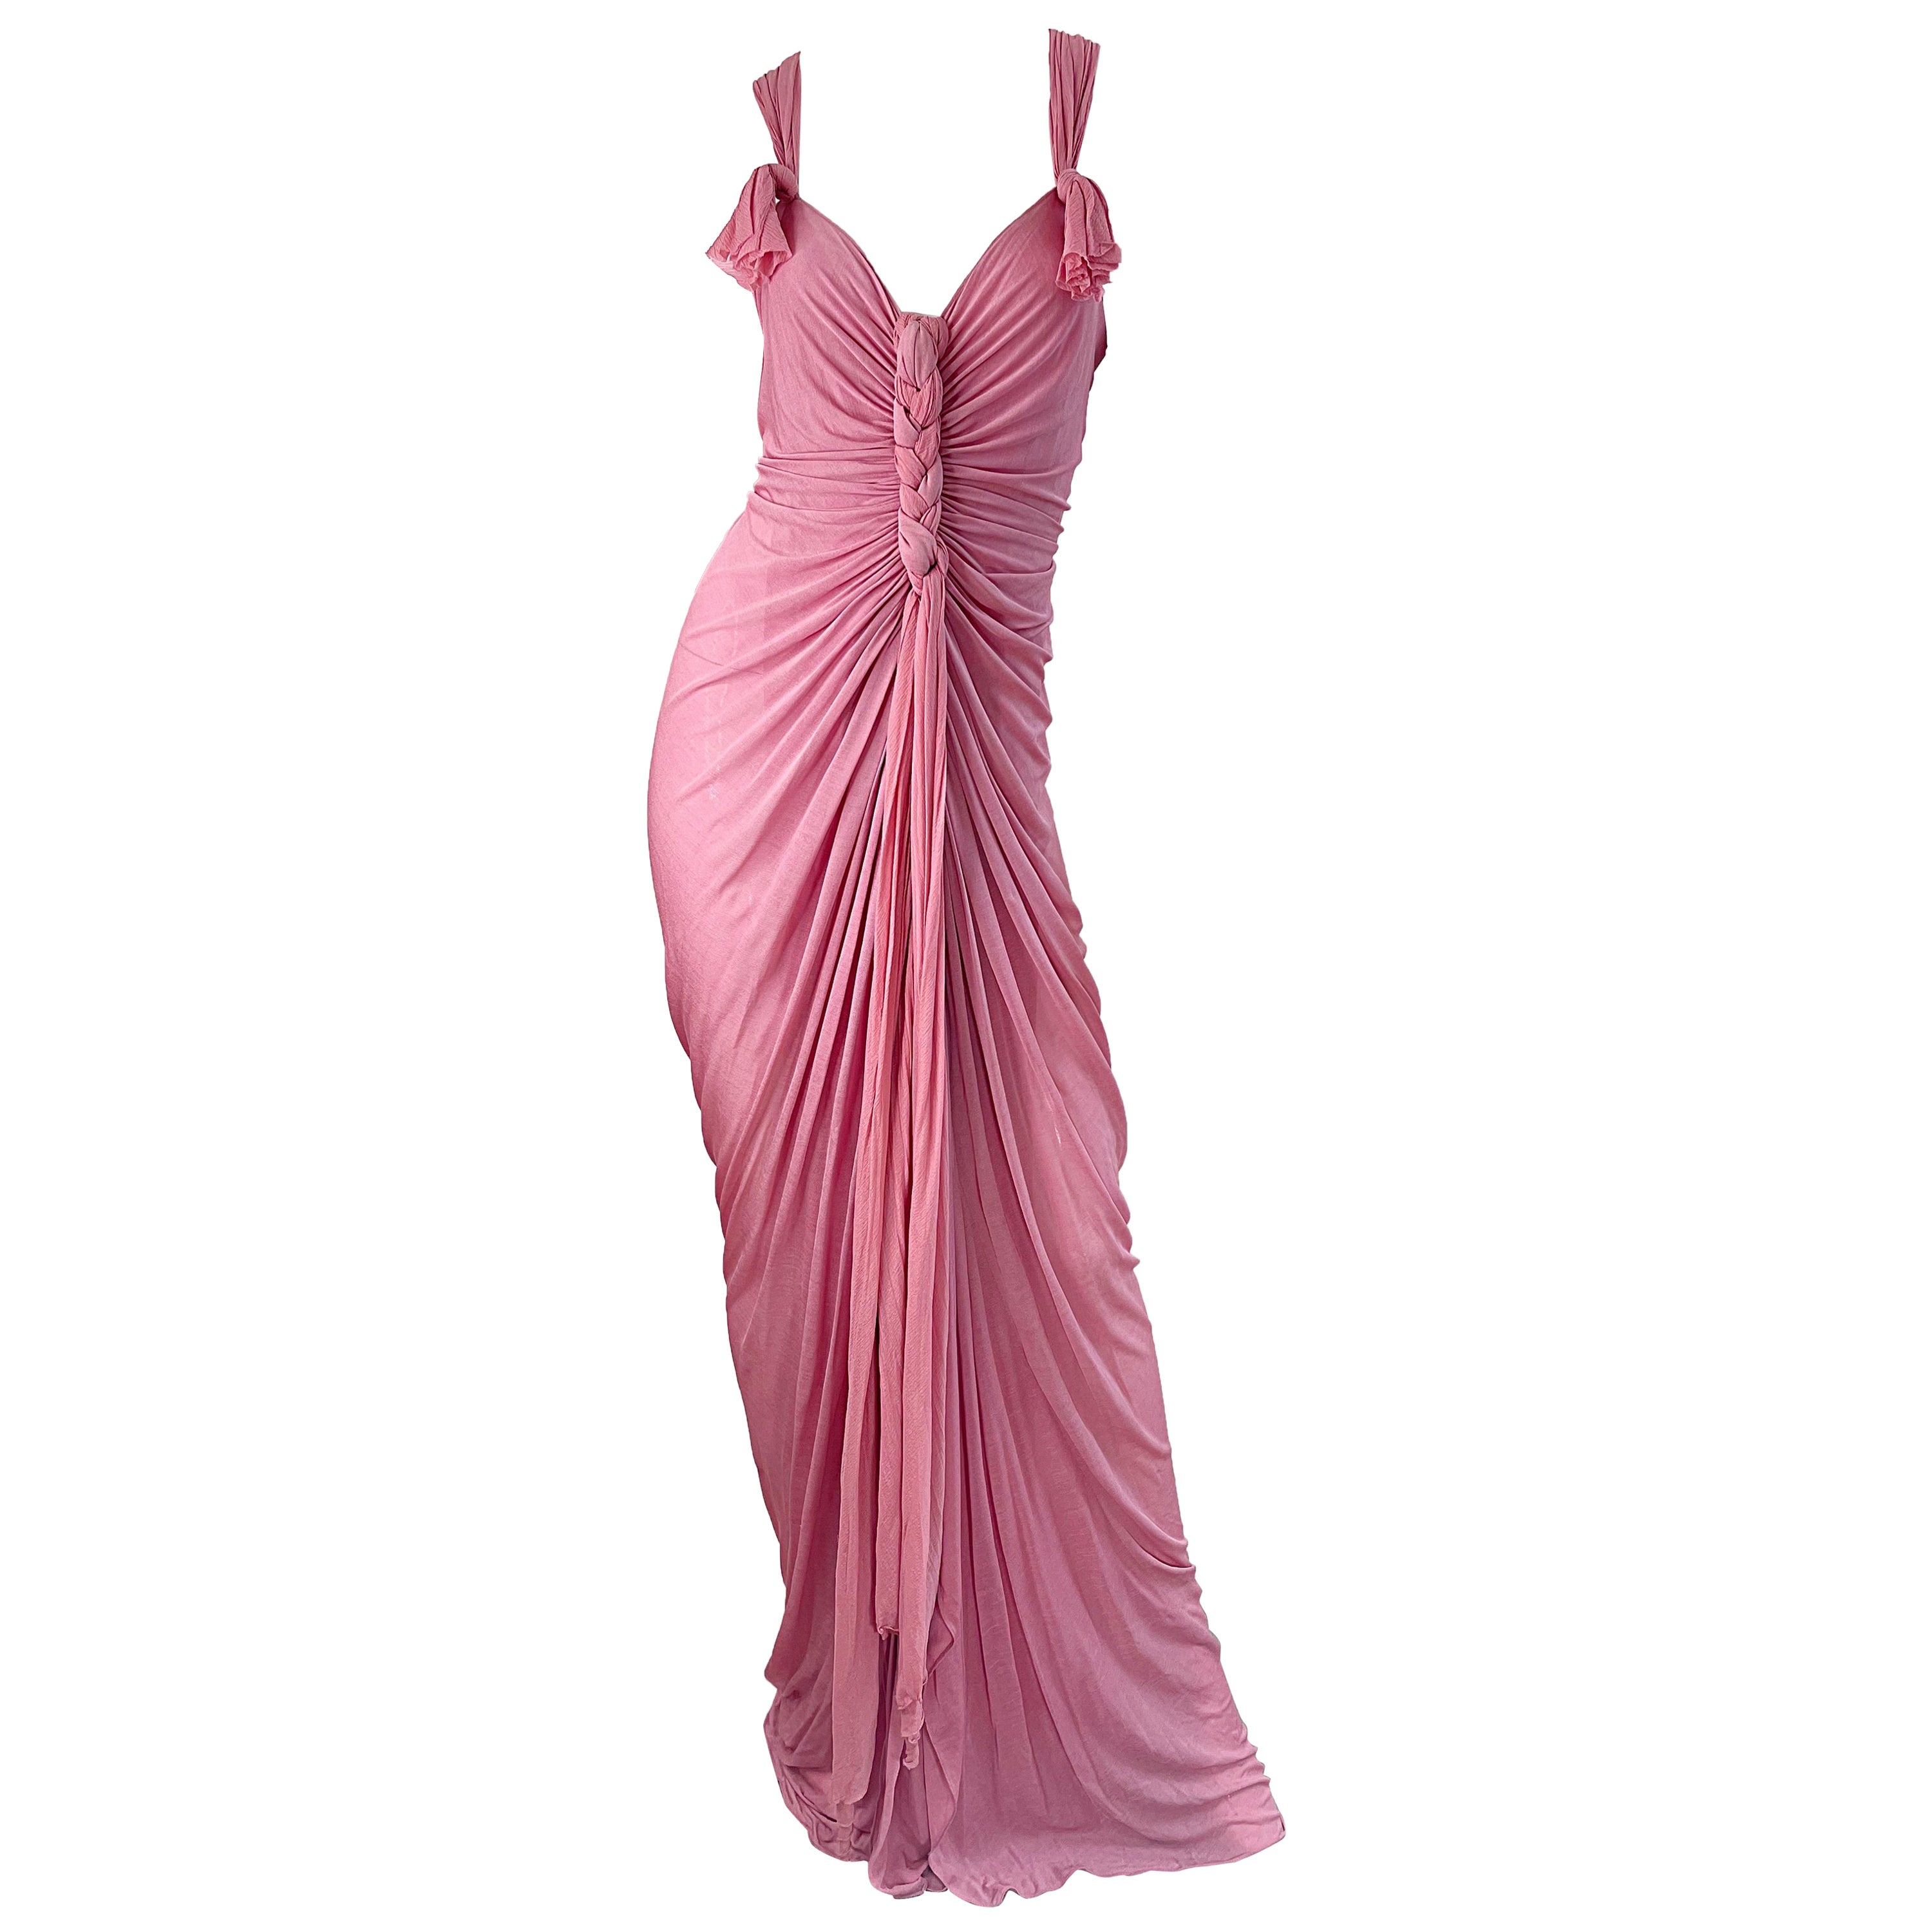 NWT Donna Karan Fall 2005 Pink Dusty Rose Mauve 30s Style Semi Sheer Gown Dress For Sale